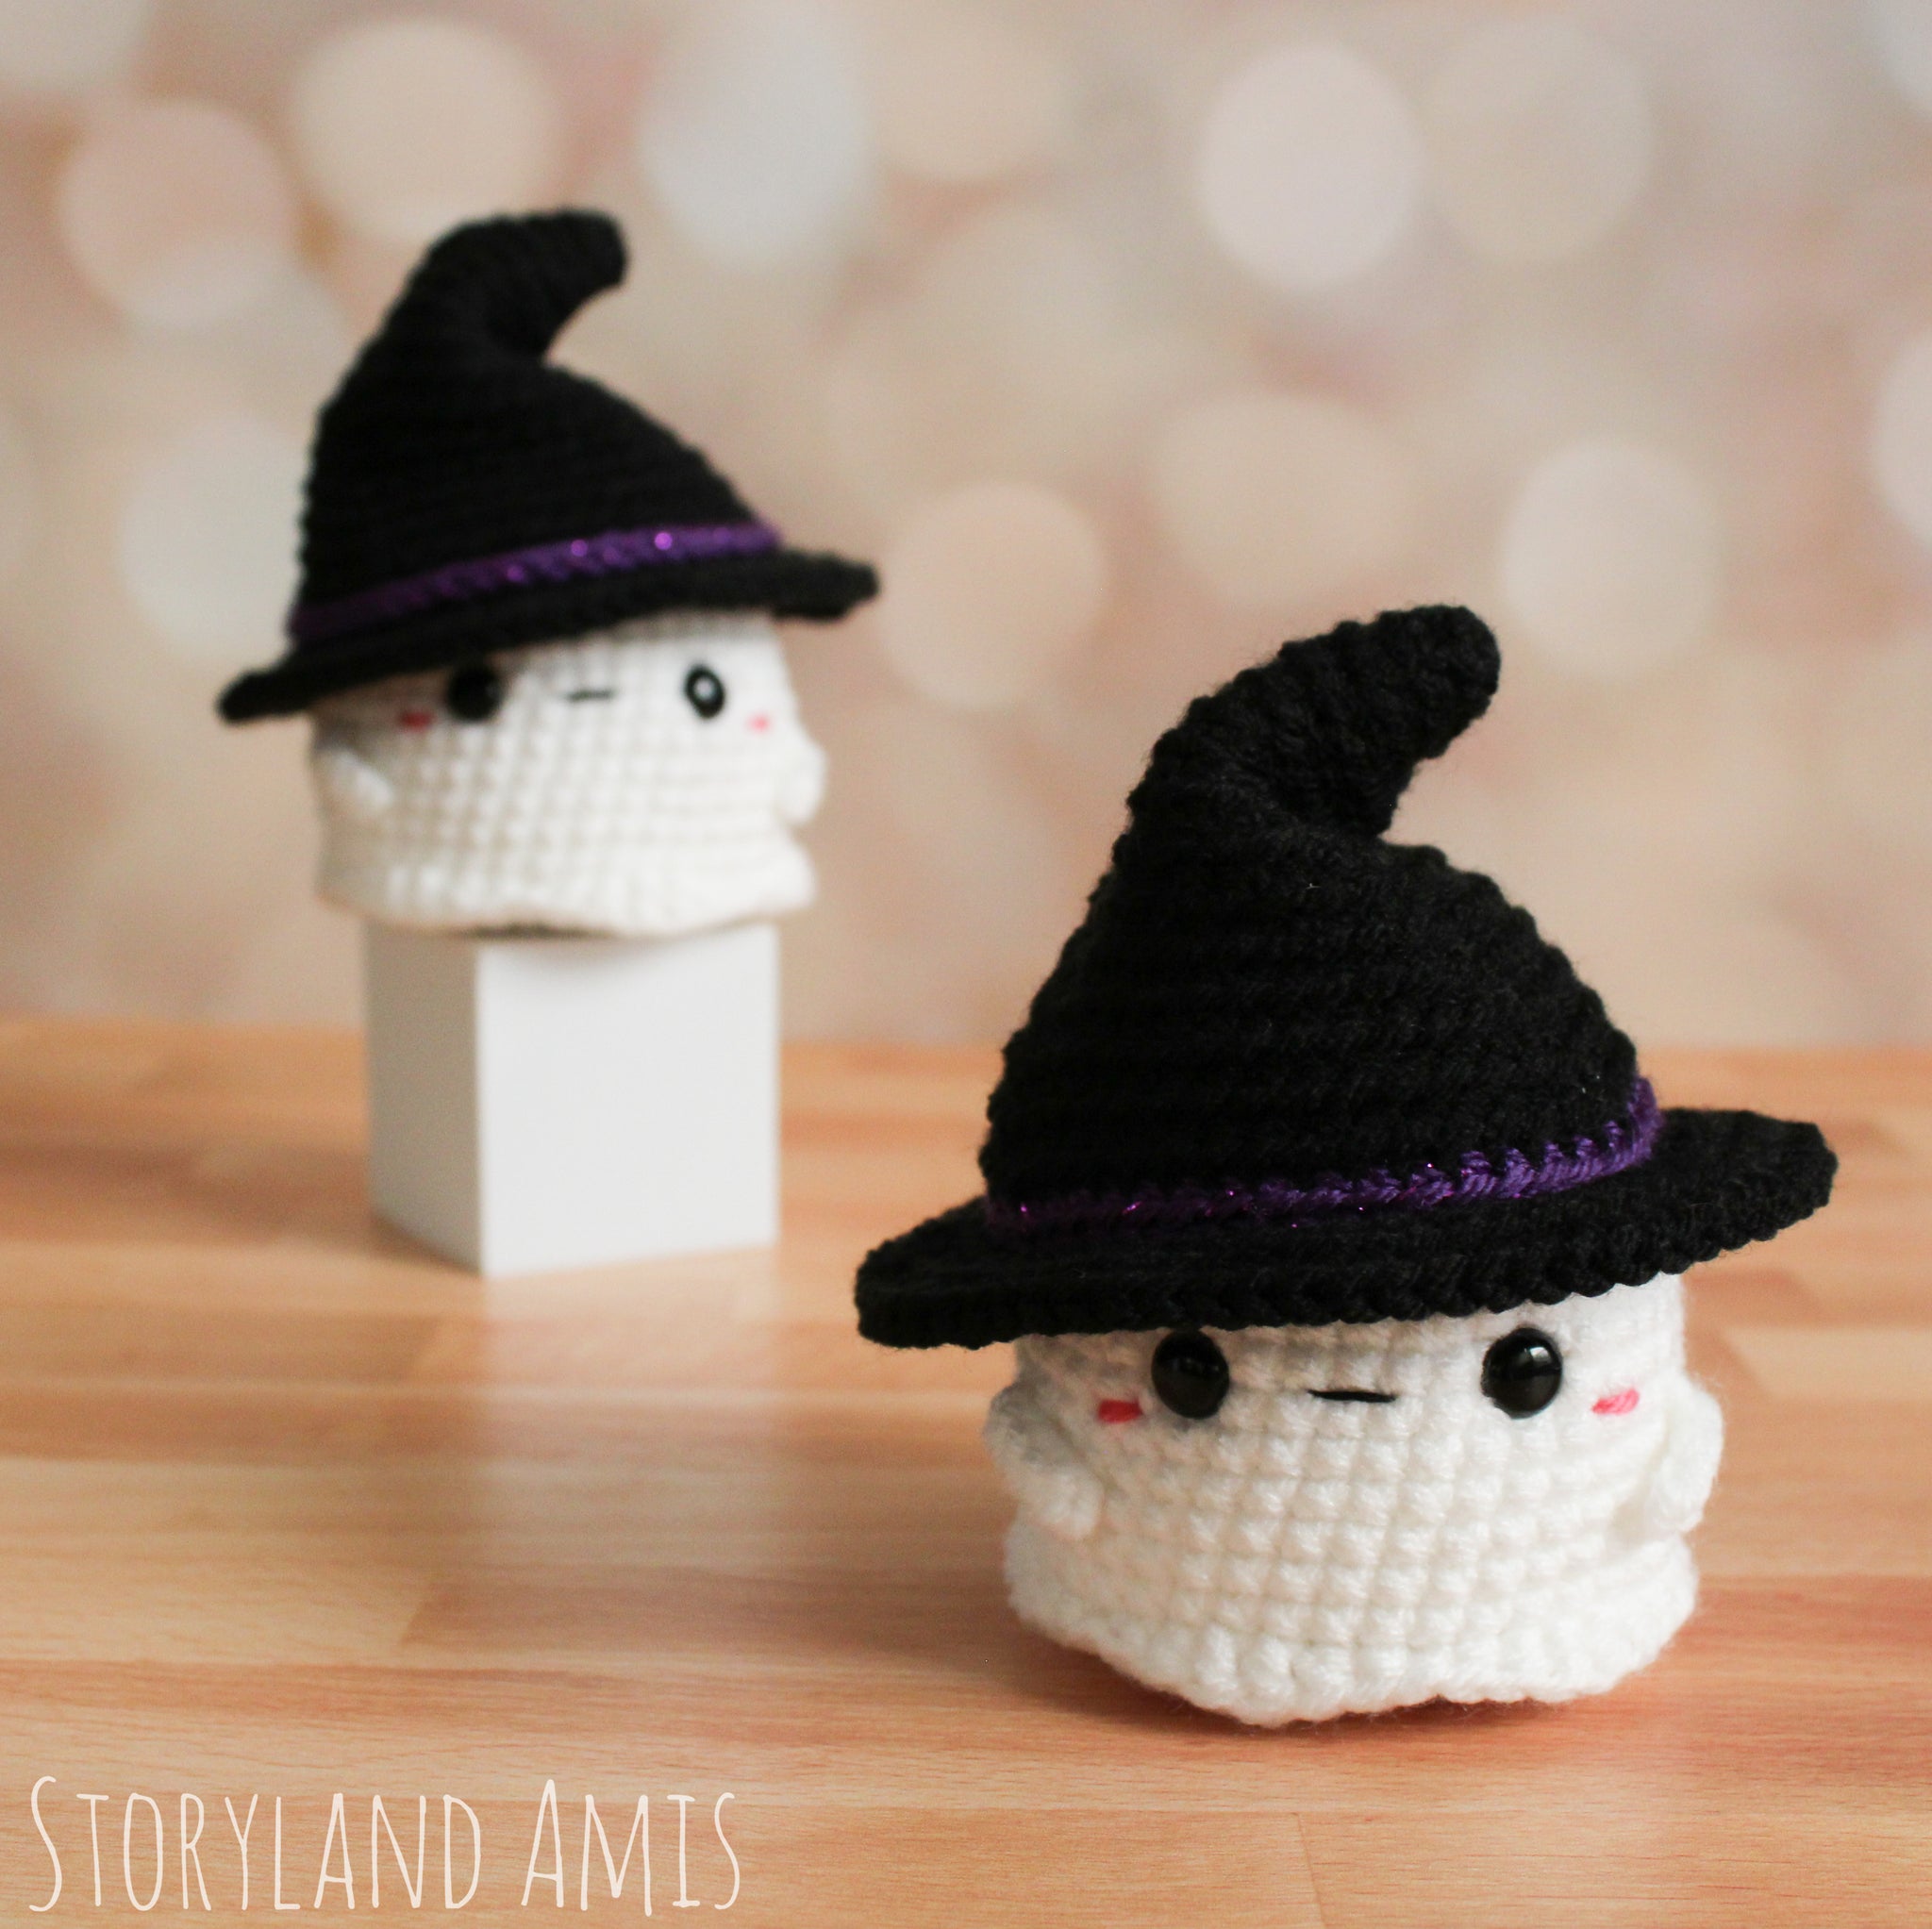 Crochet PATTERN Scout the Baby Ghost Amigurumi – Storyland Amis